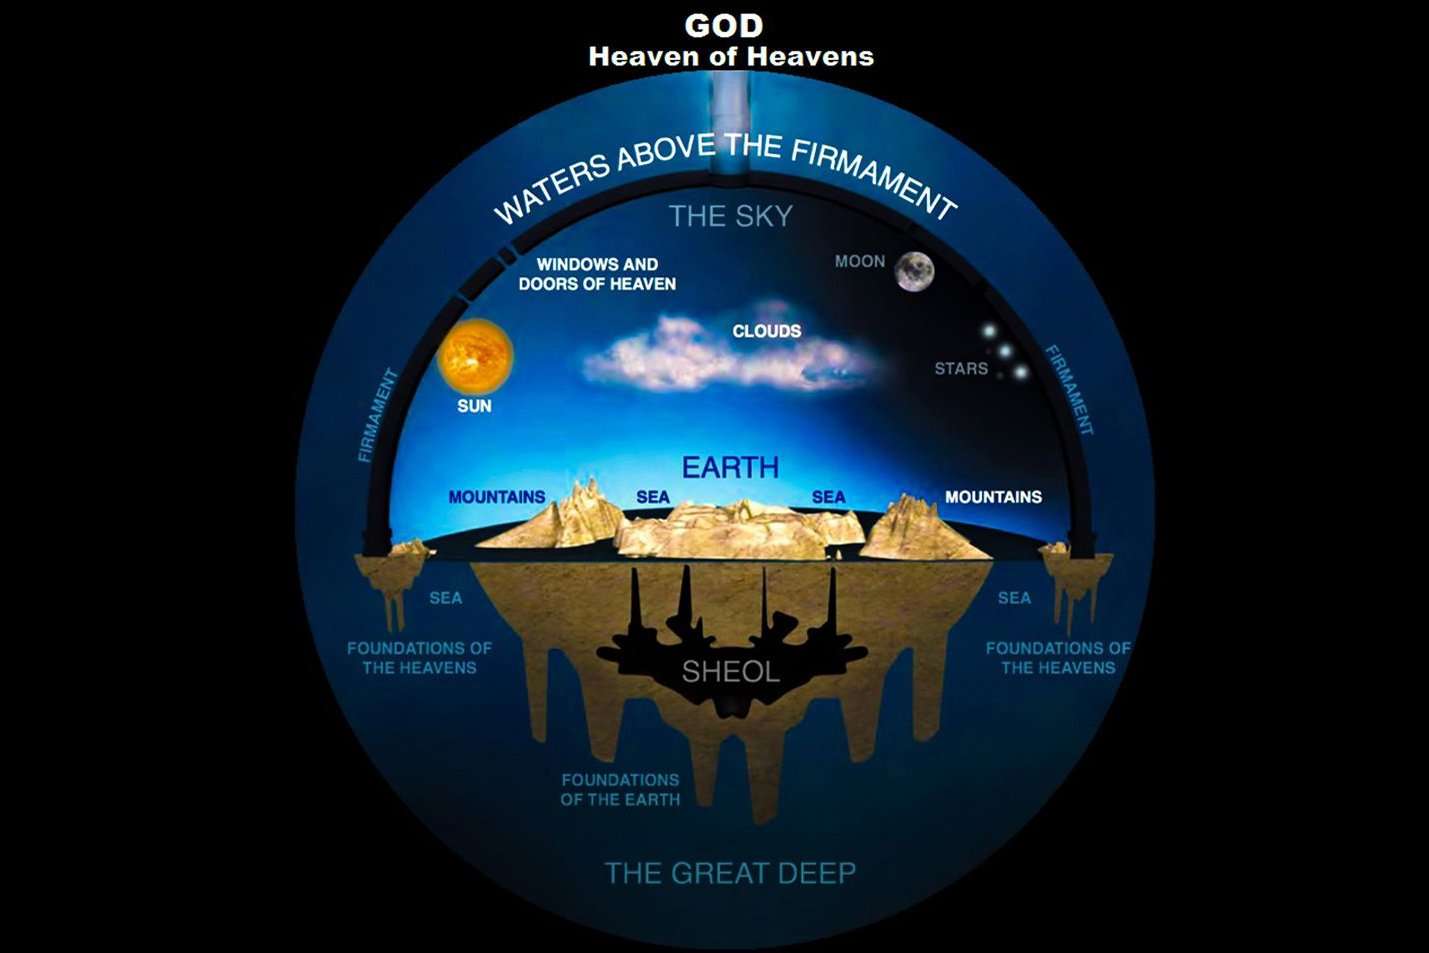 Does Genesis Reveal The Age Of The Earth?